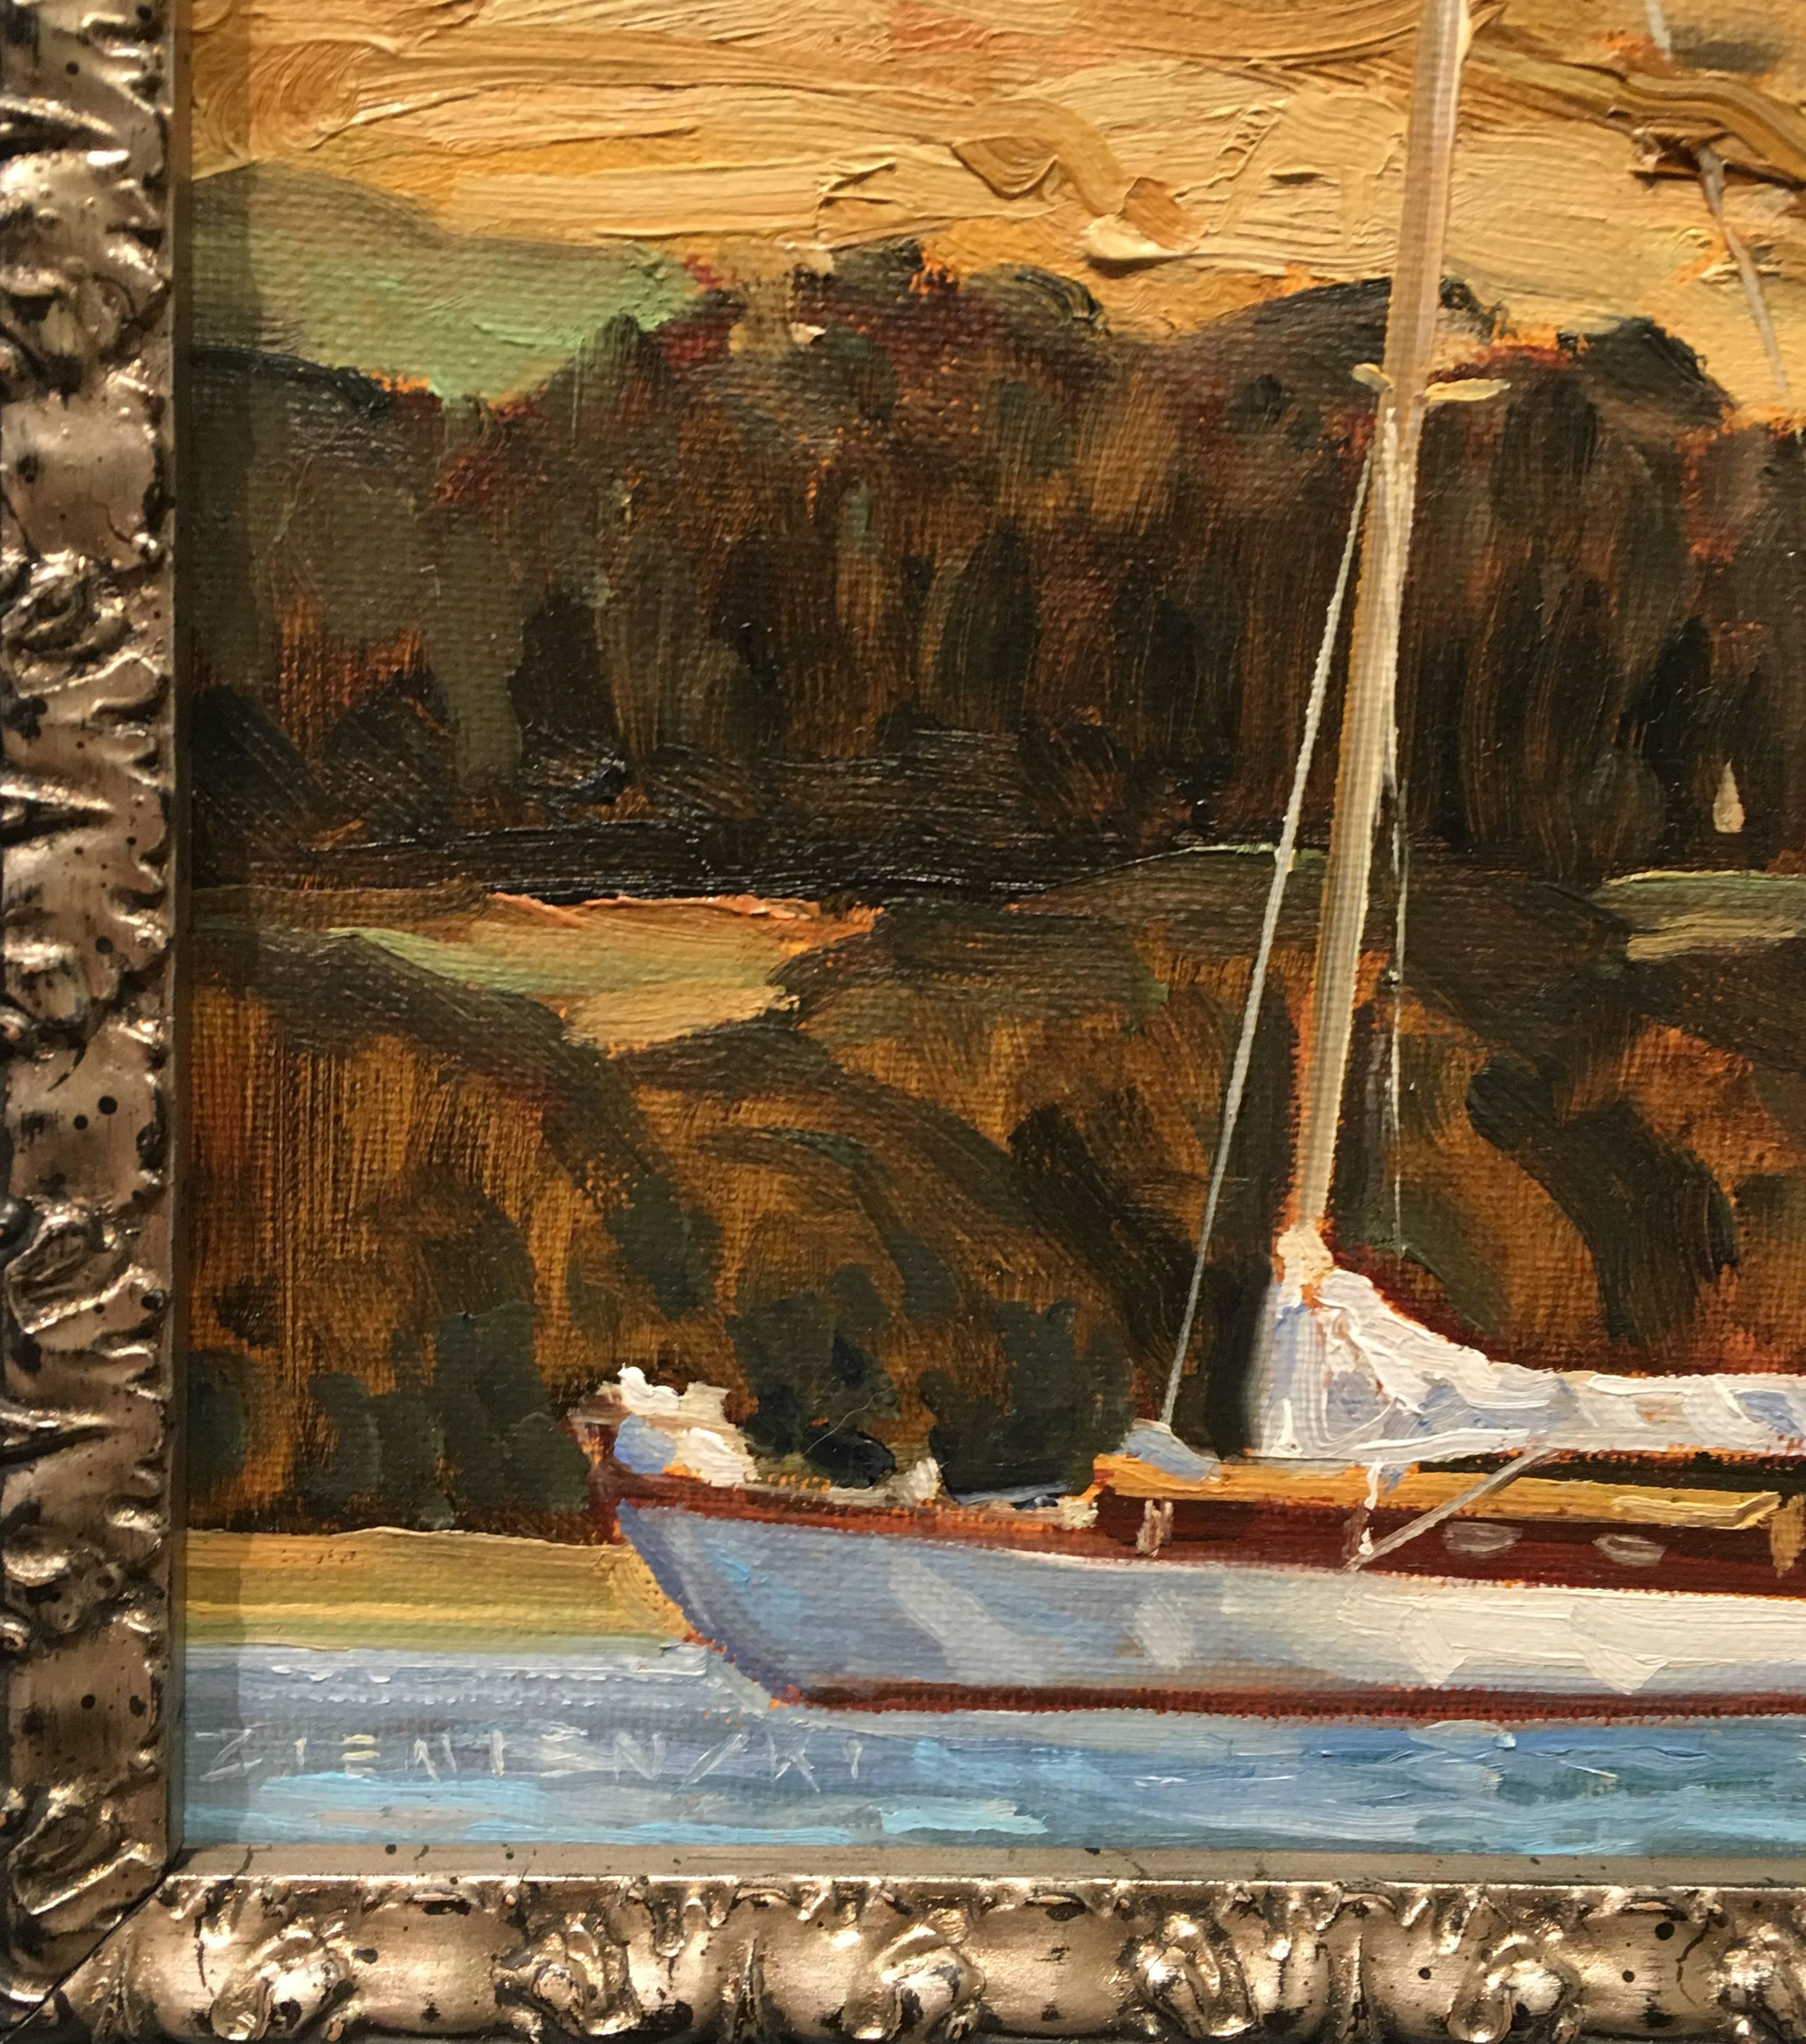 Sloop at Anchor, Tomales Bay, West Marin - Painting by Dennis Ziemienski